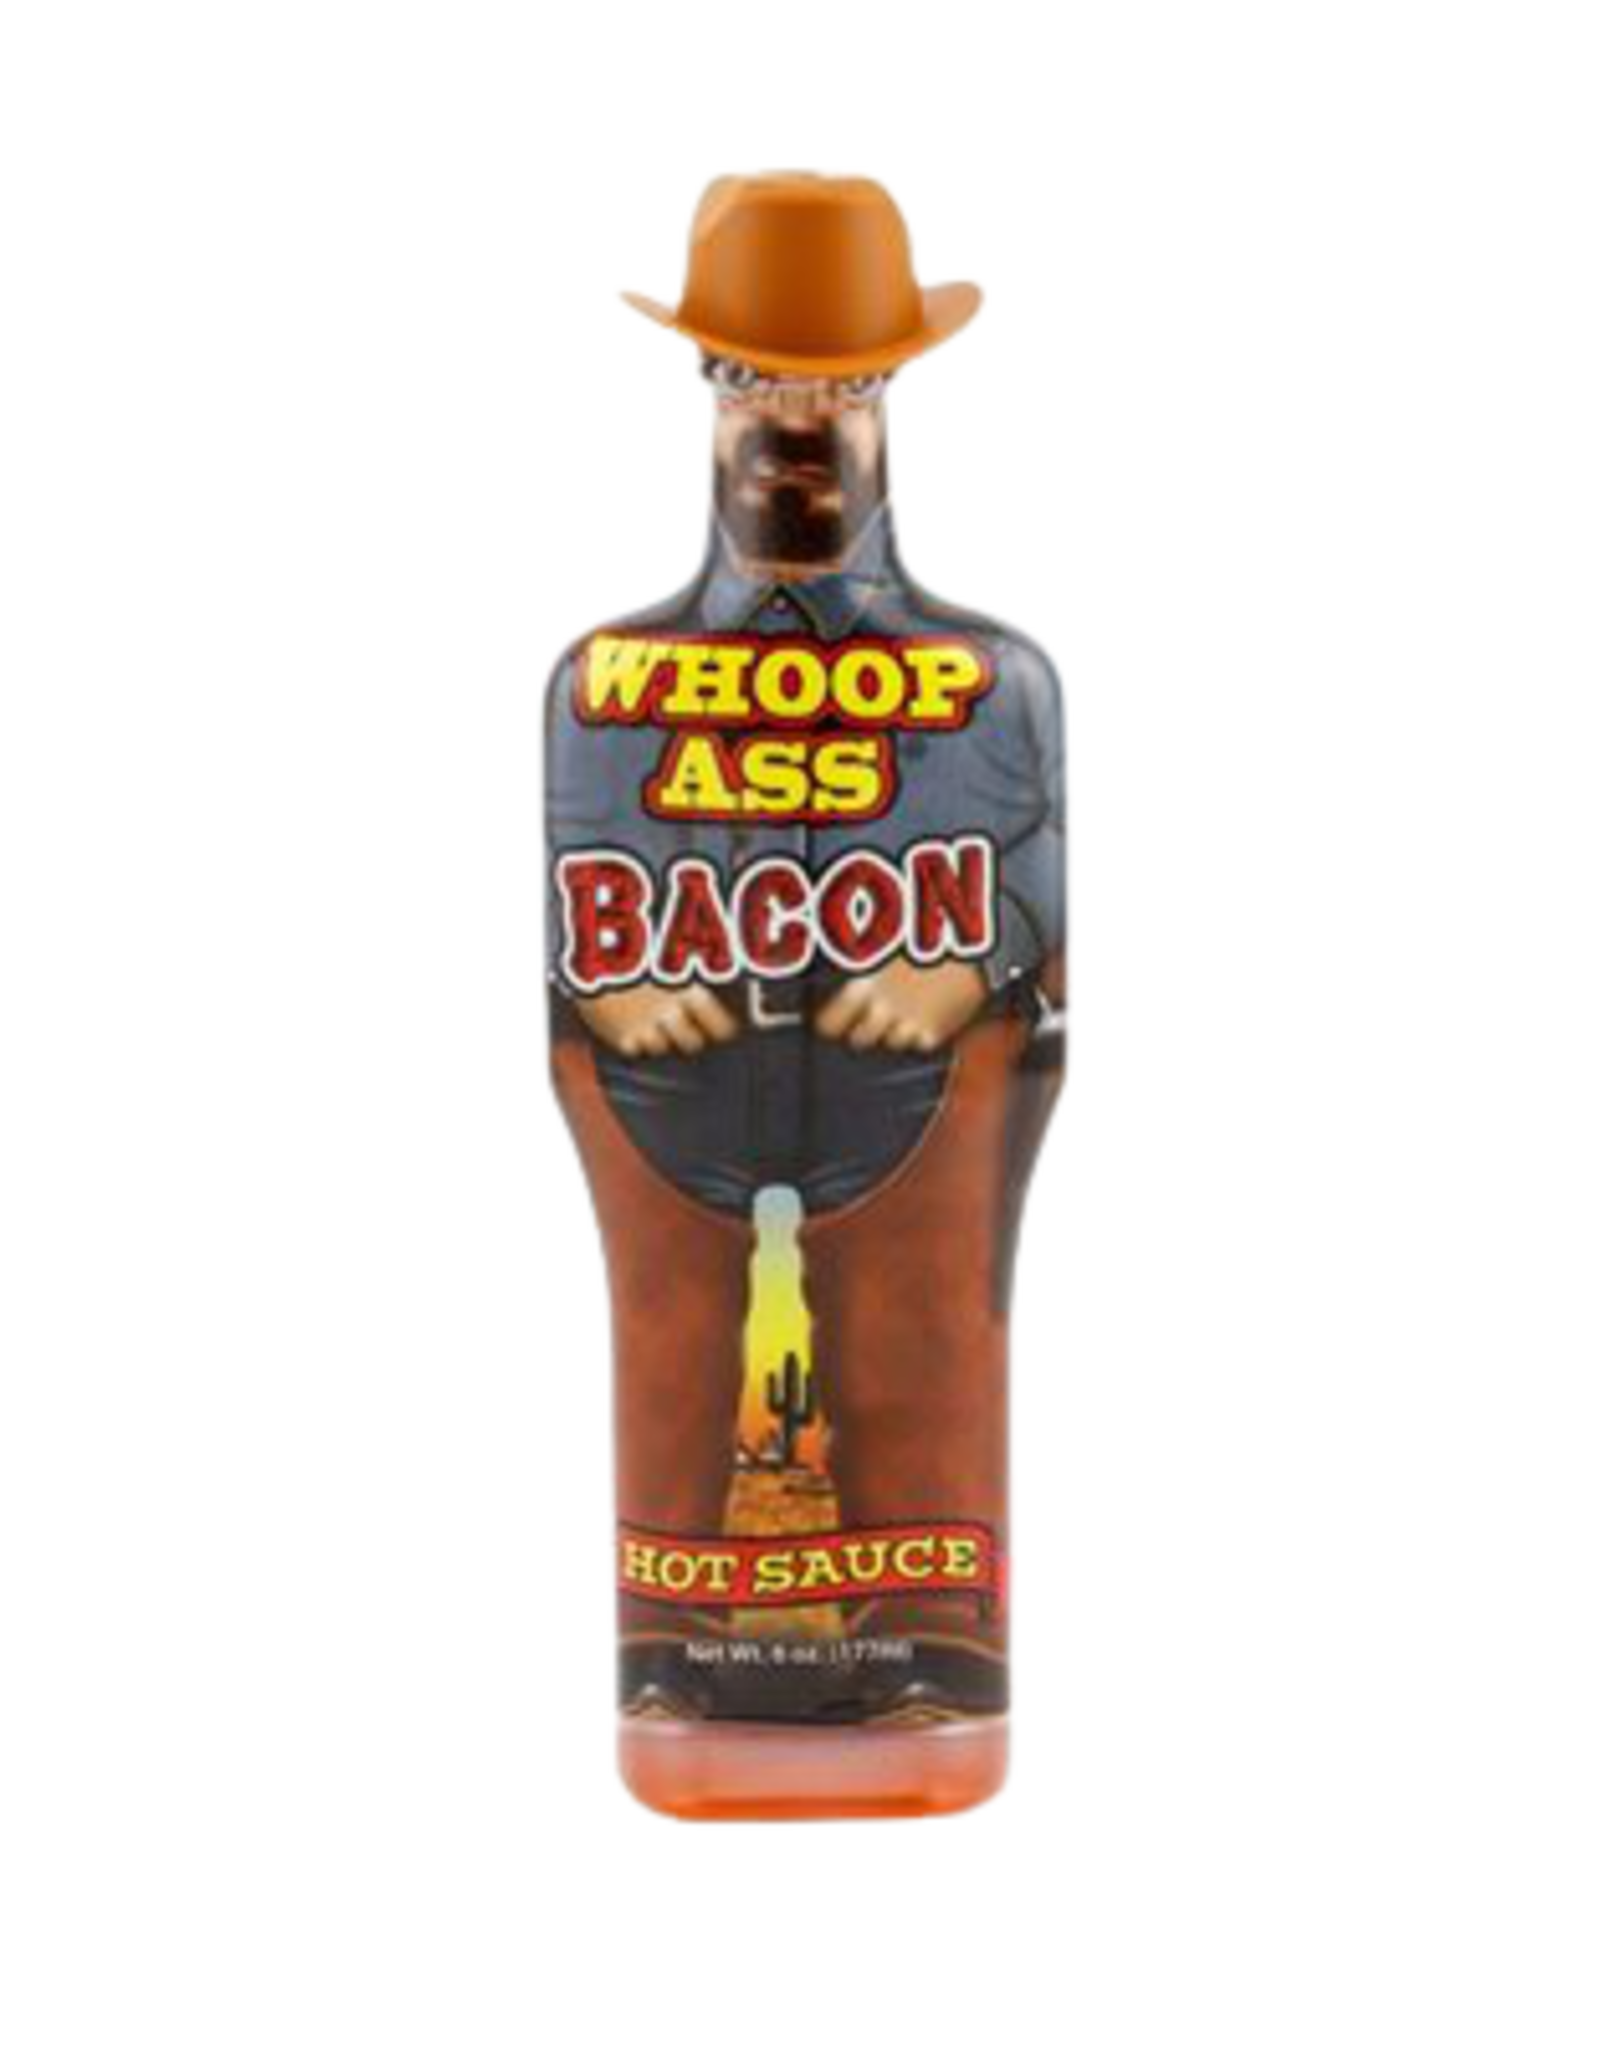 Bacon - Whoop Ass DISC